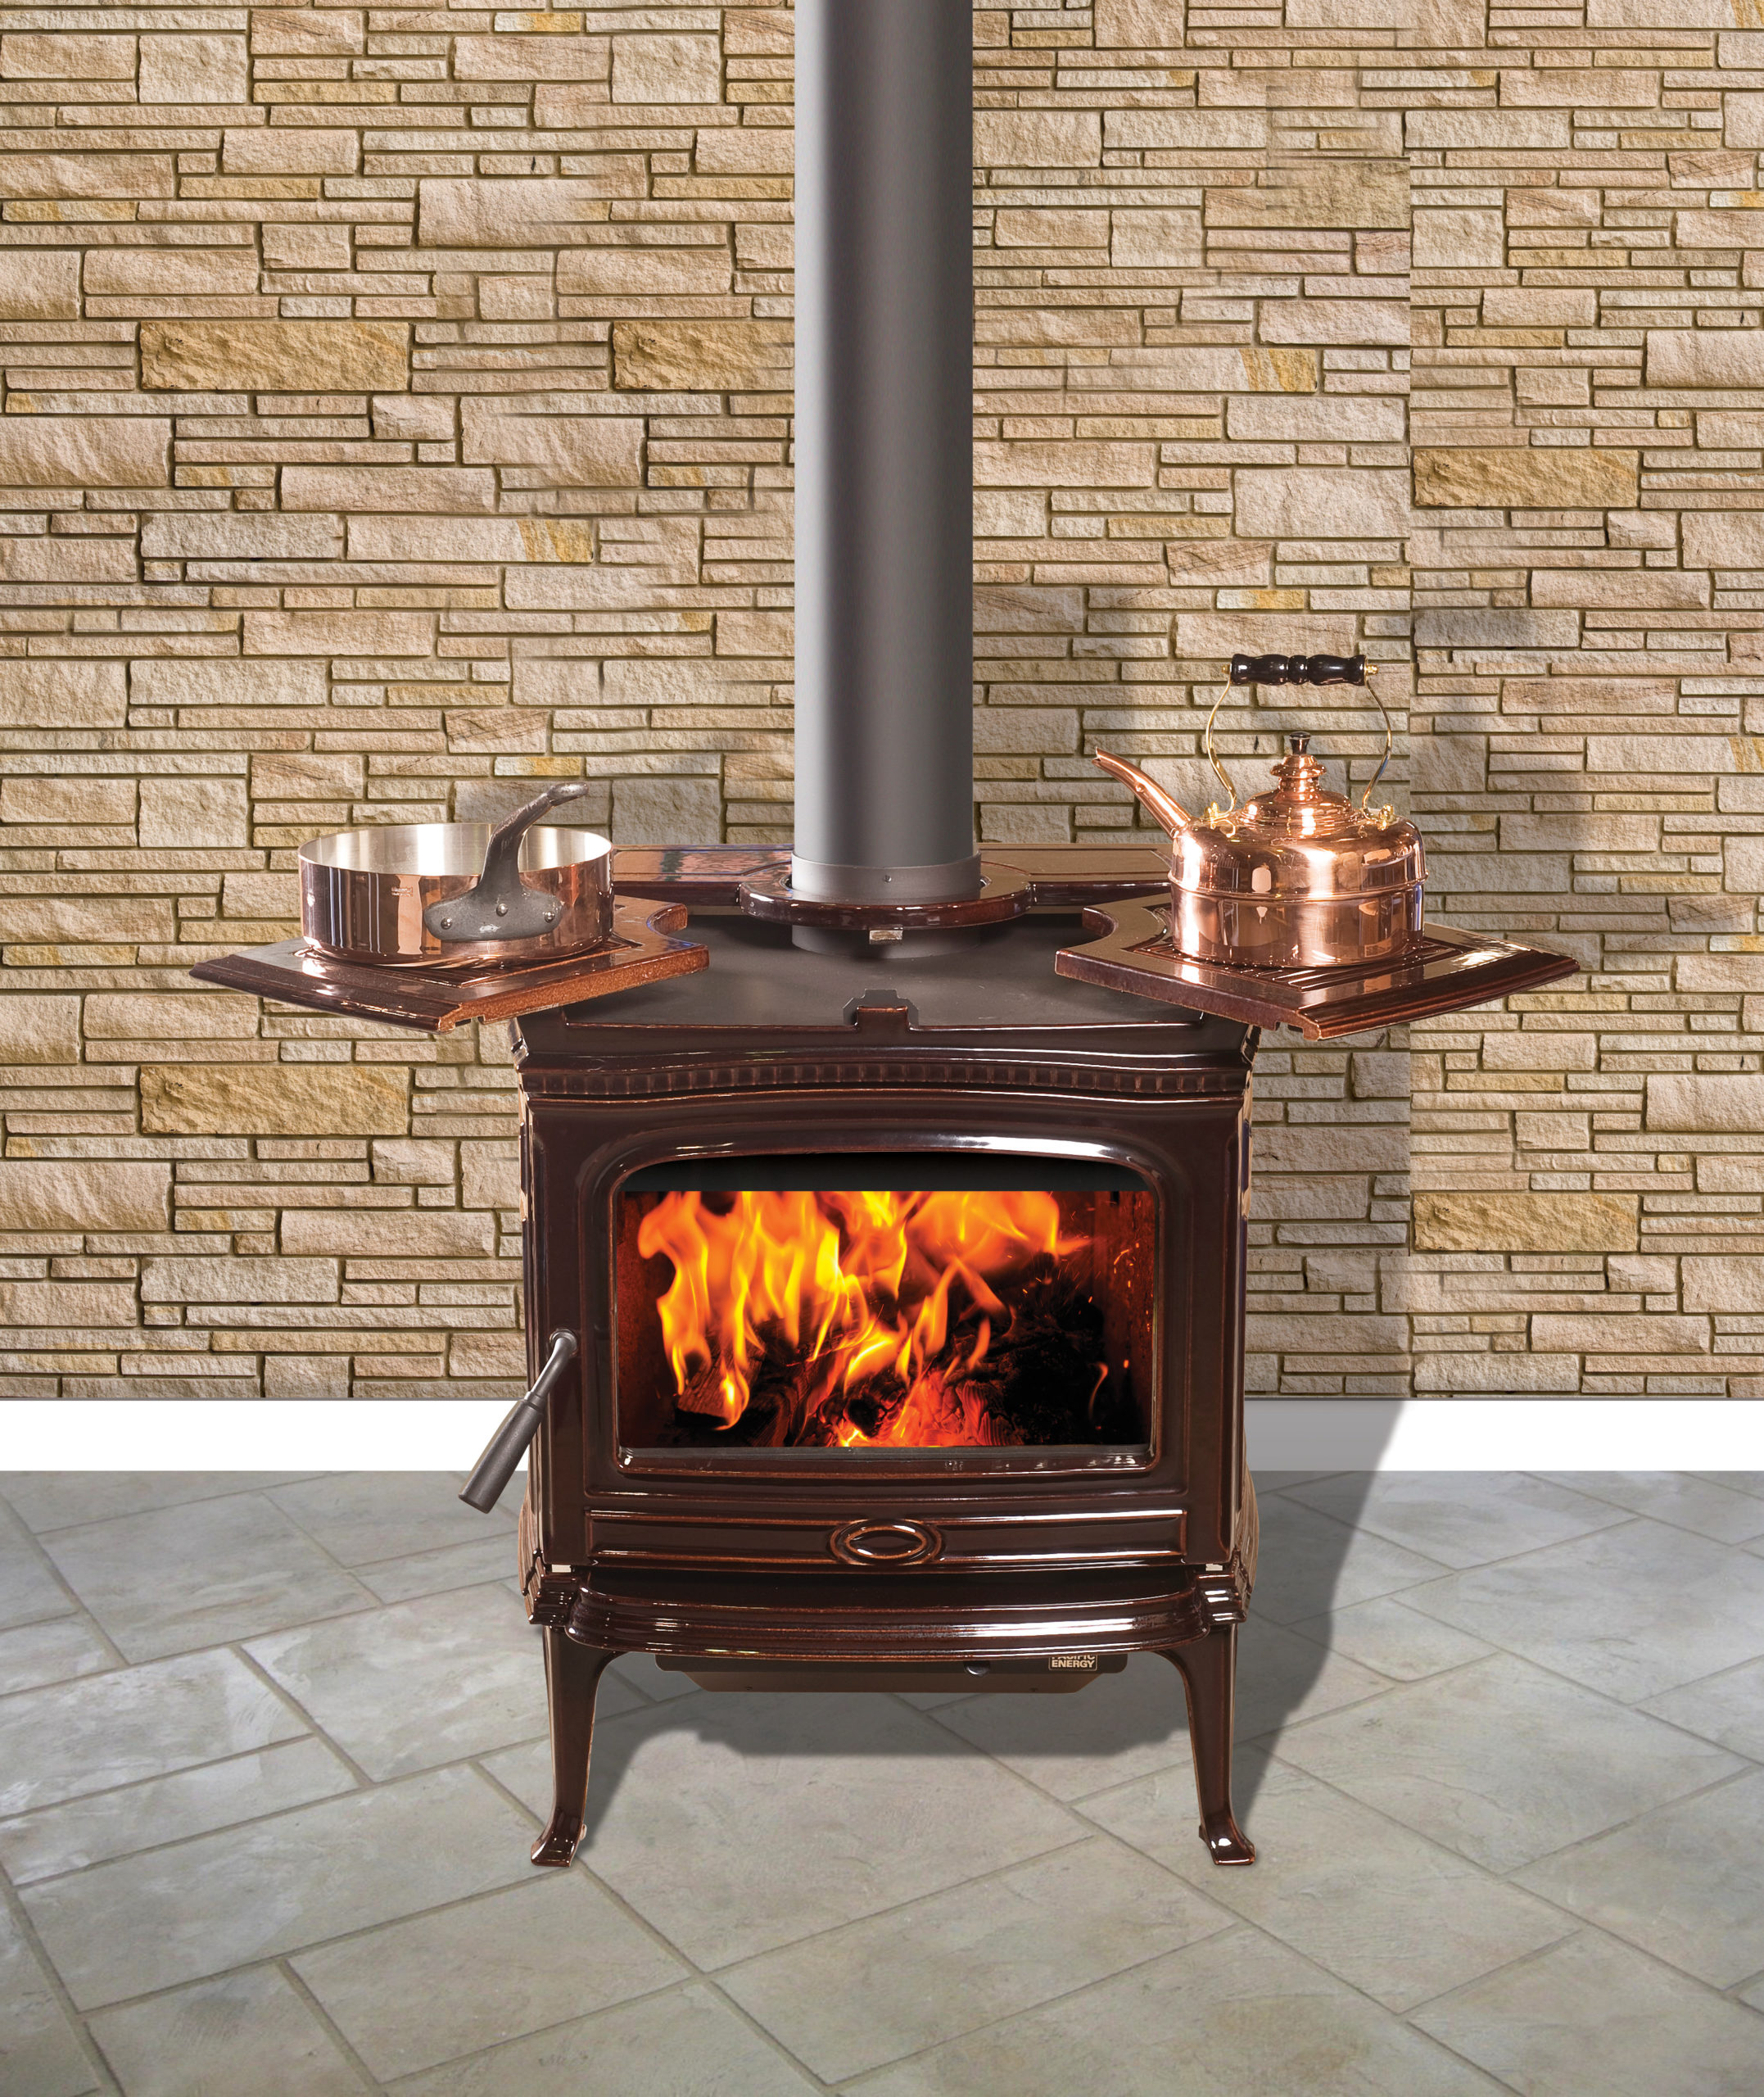 Alderlea T5 Classic LE wood stove in Majolica brown featuring Cast Iron over Steel technology